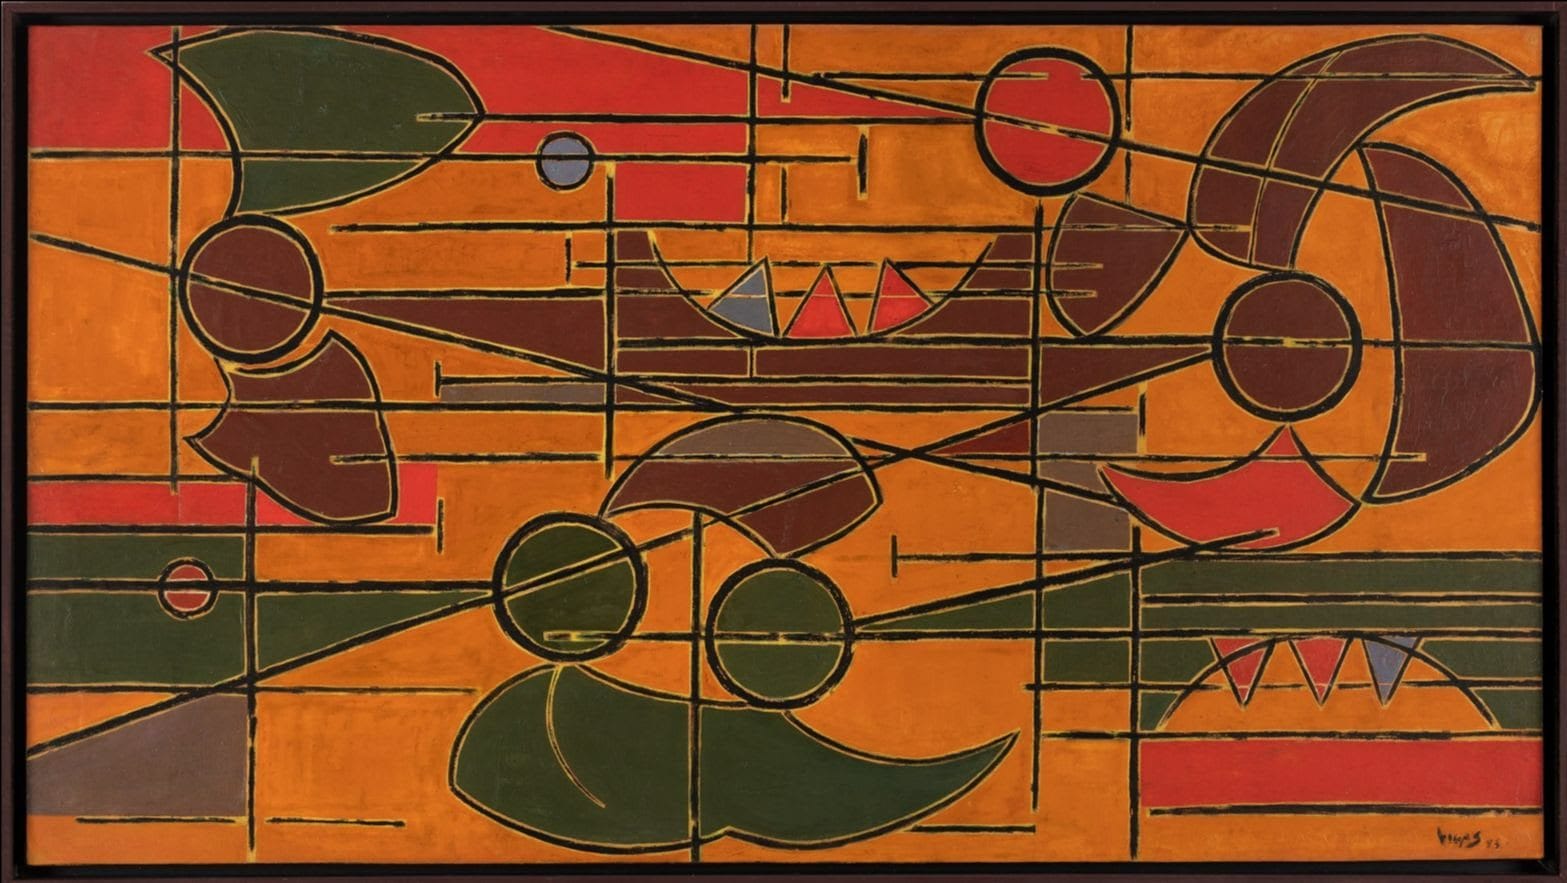 Oswaldo Vigas, Proyecto para Mural en Naranja, 1953, Oil on paper fixed on Masonite. Image courtesy of Galería RGR and the artist.